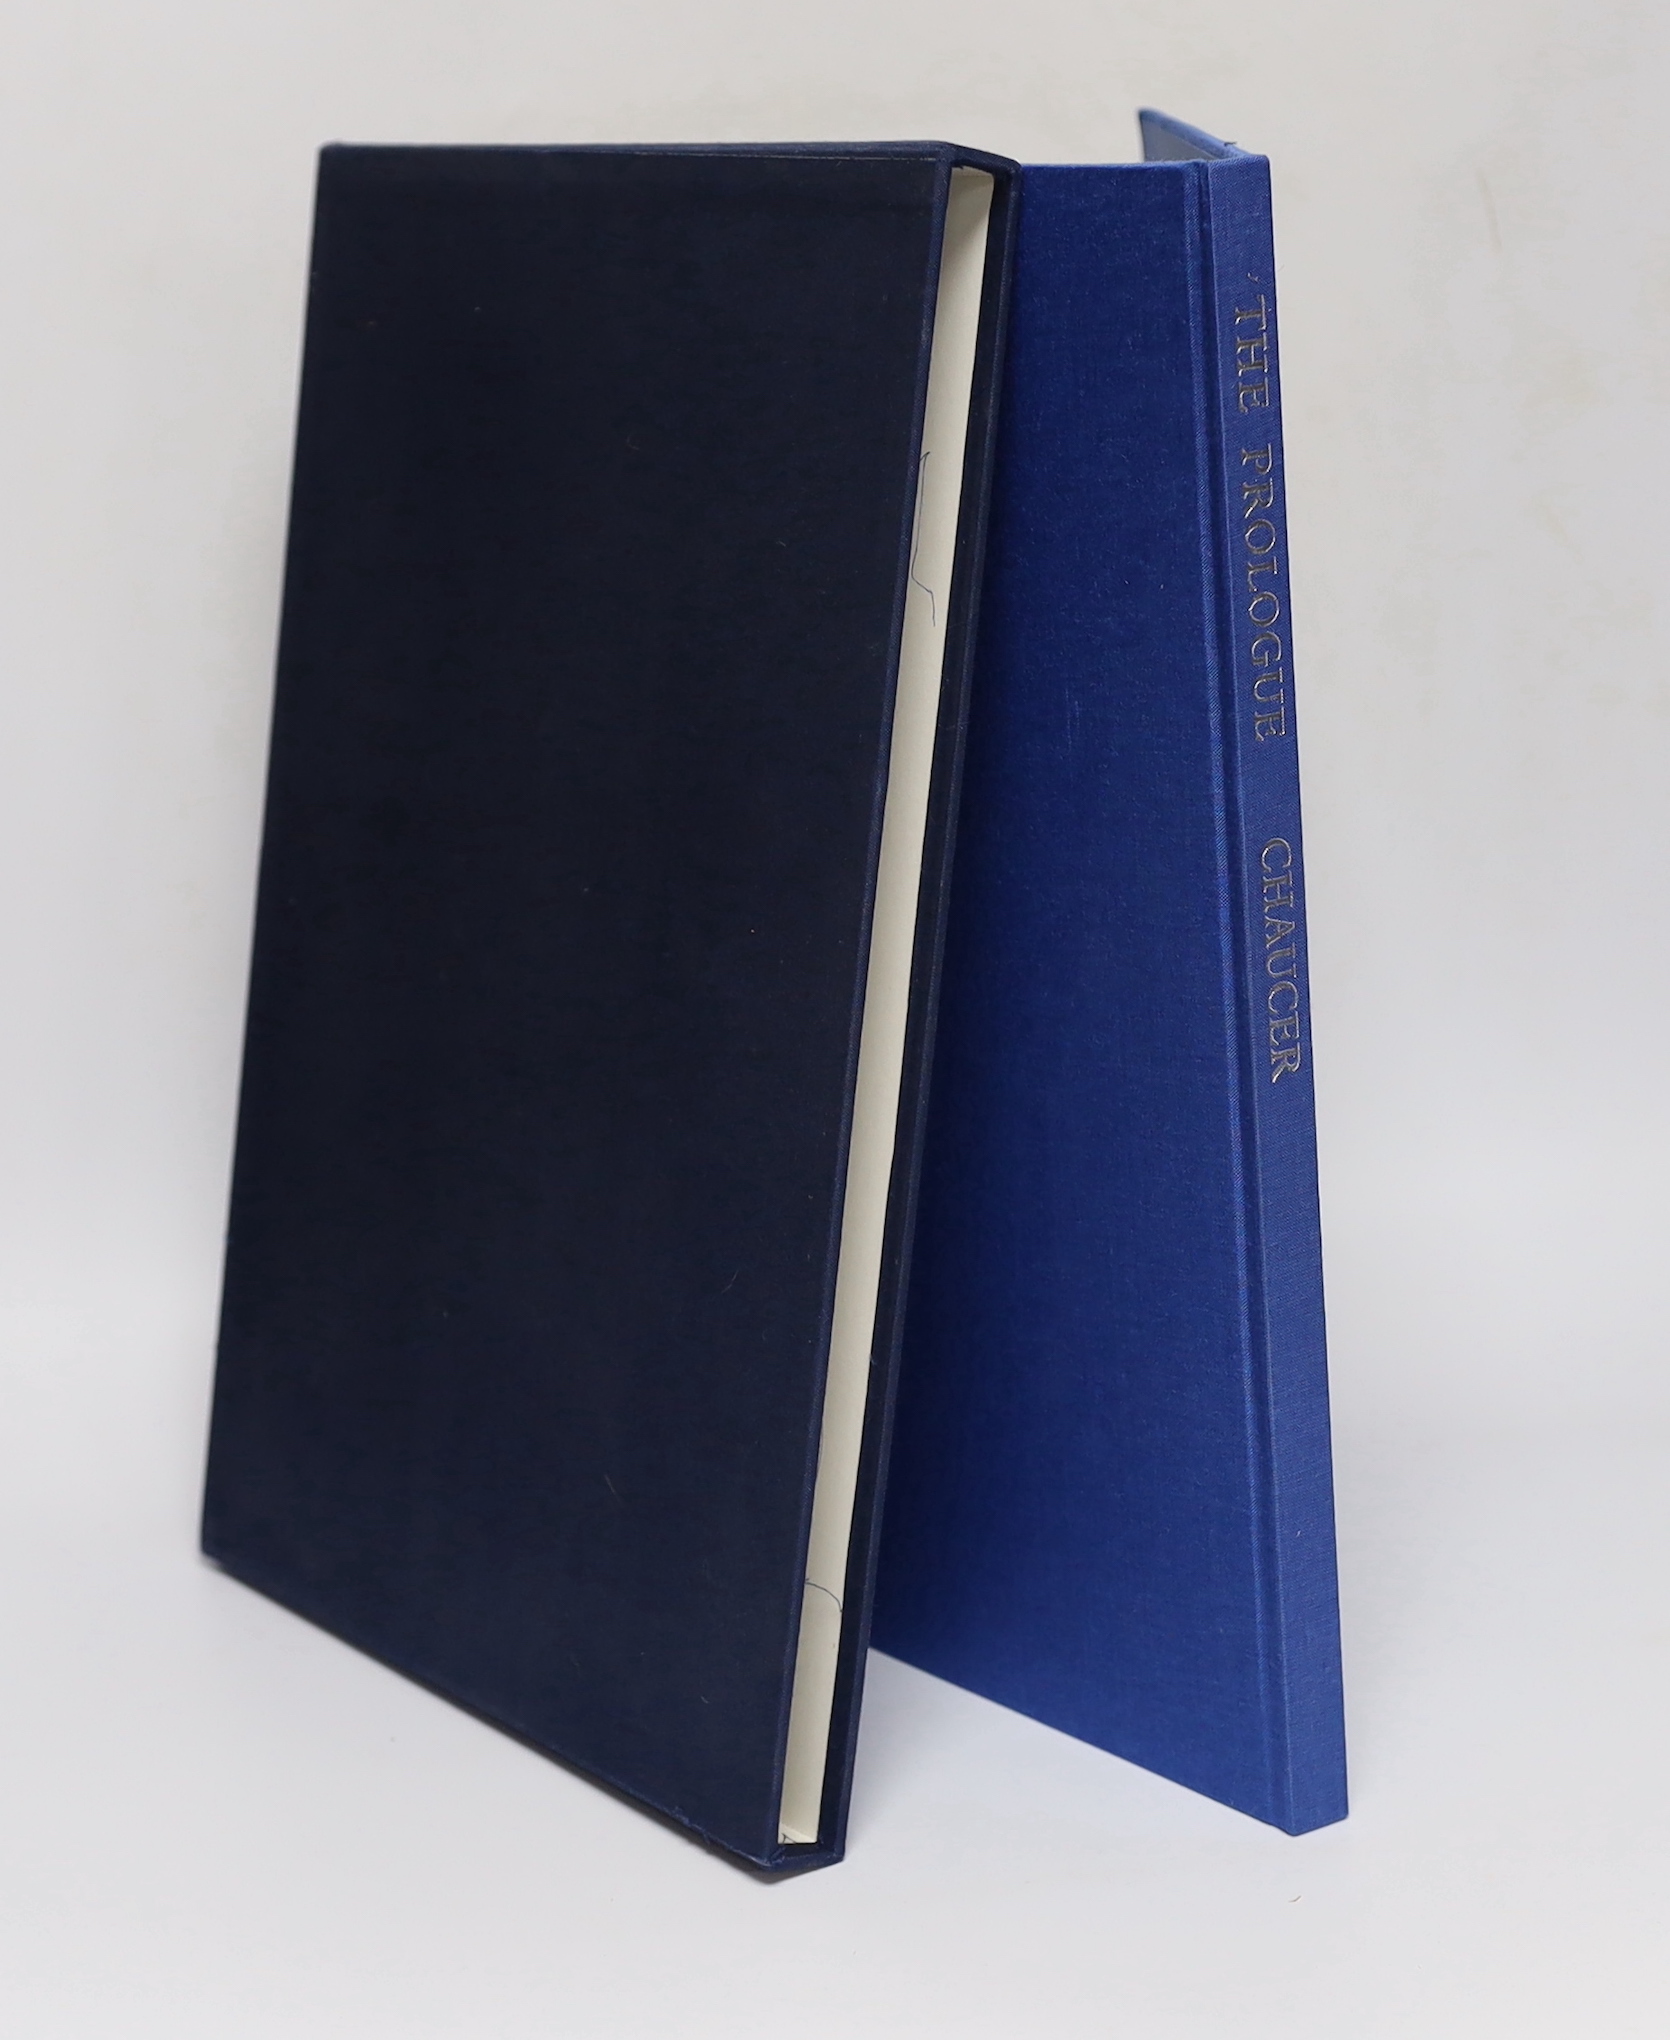 Chaucer, Geoffrey - King, Ronald (illustrator) - The Prologue to Canterbury Tales, 2nd edition, one of 250 initialled by King, folio, blue cloth, with 14 bound in colour screen prints and a prospectus, Circle Press, Guil